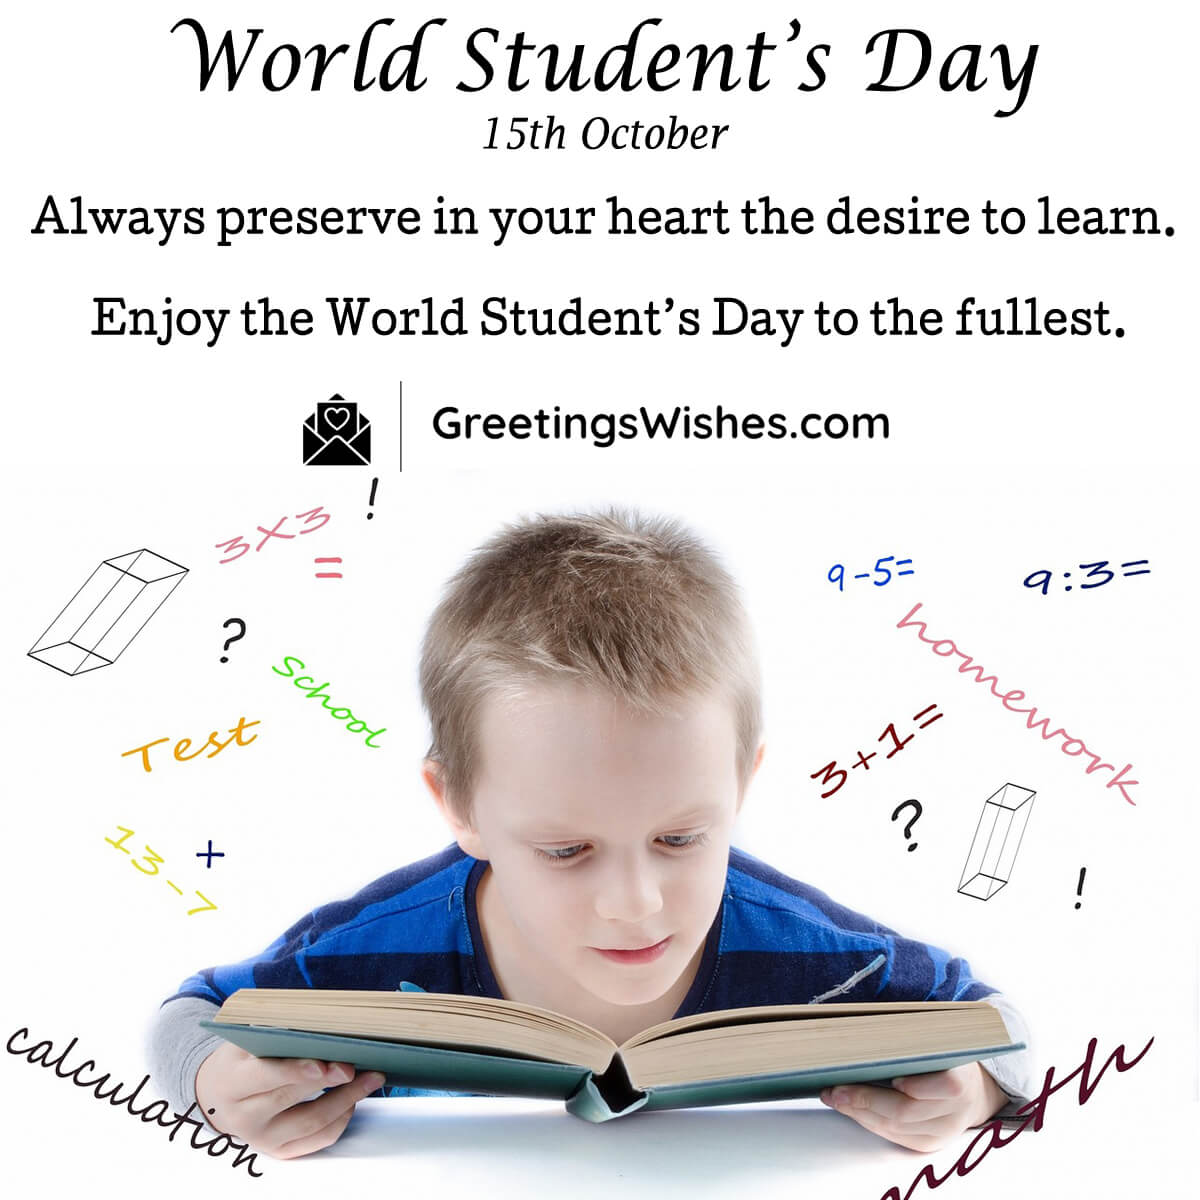 World Student’s Day Greetings